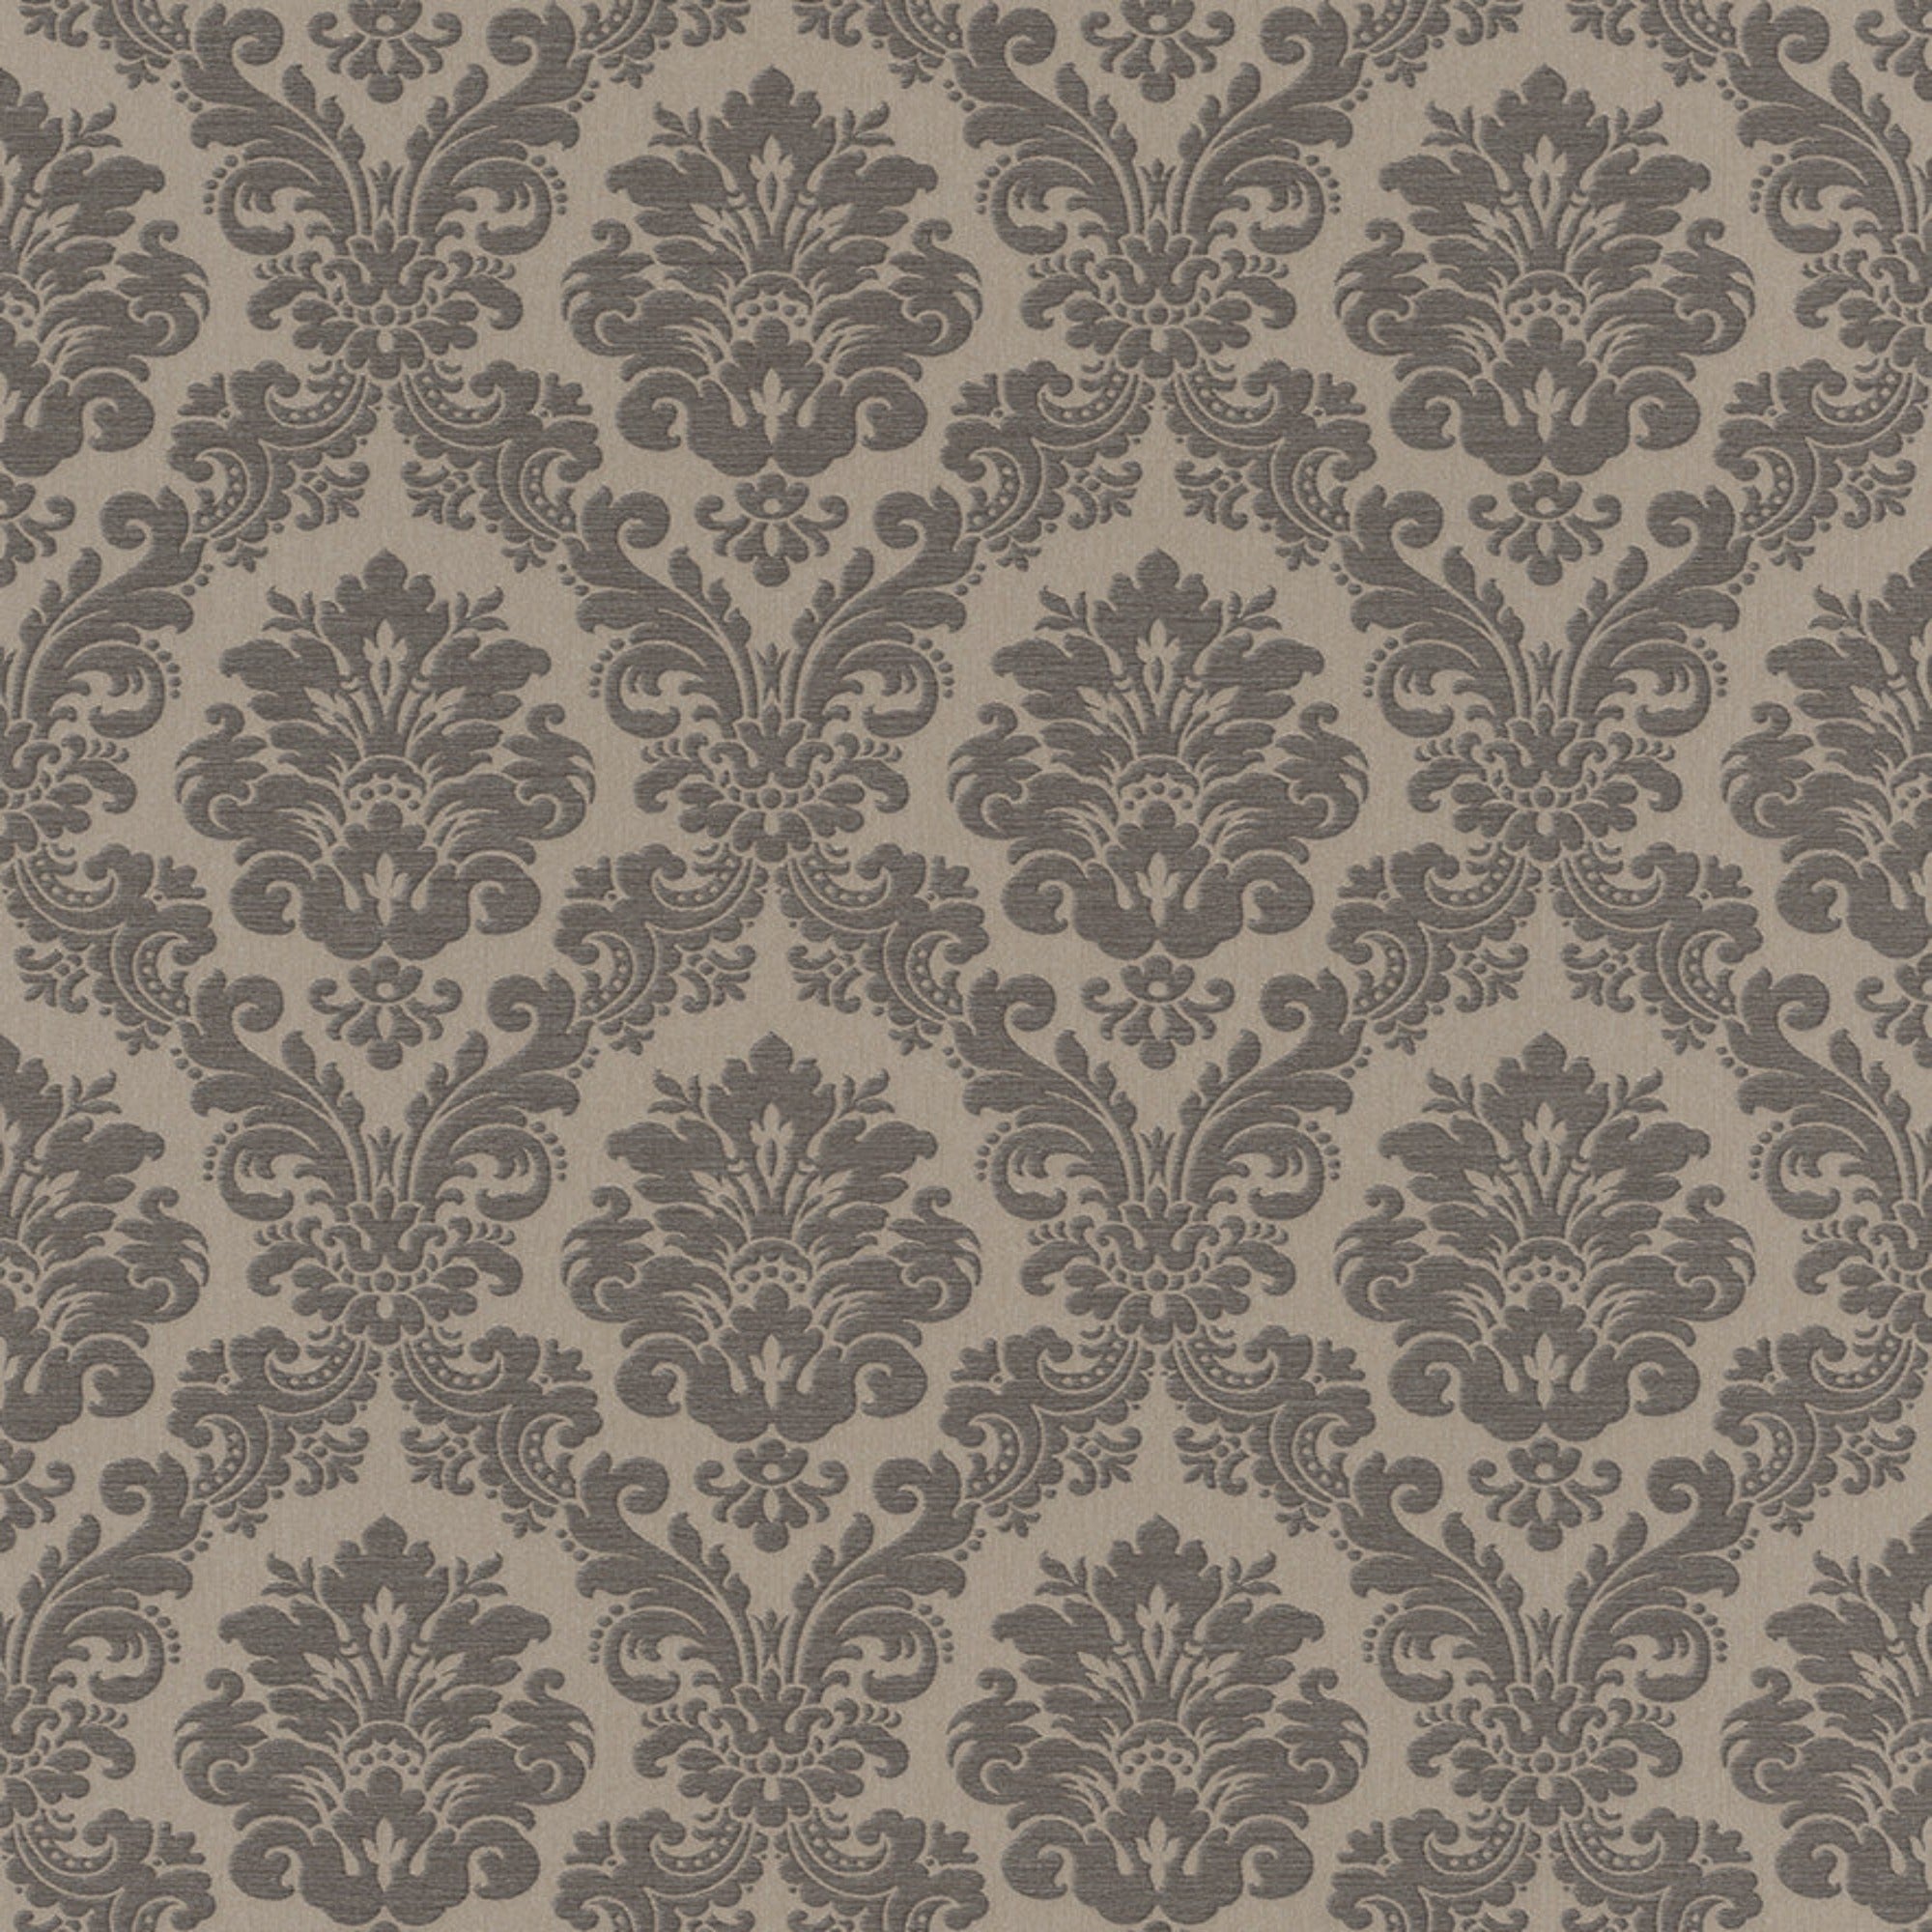 Trianon Damask Brown and Charcoal Wallpaper